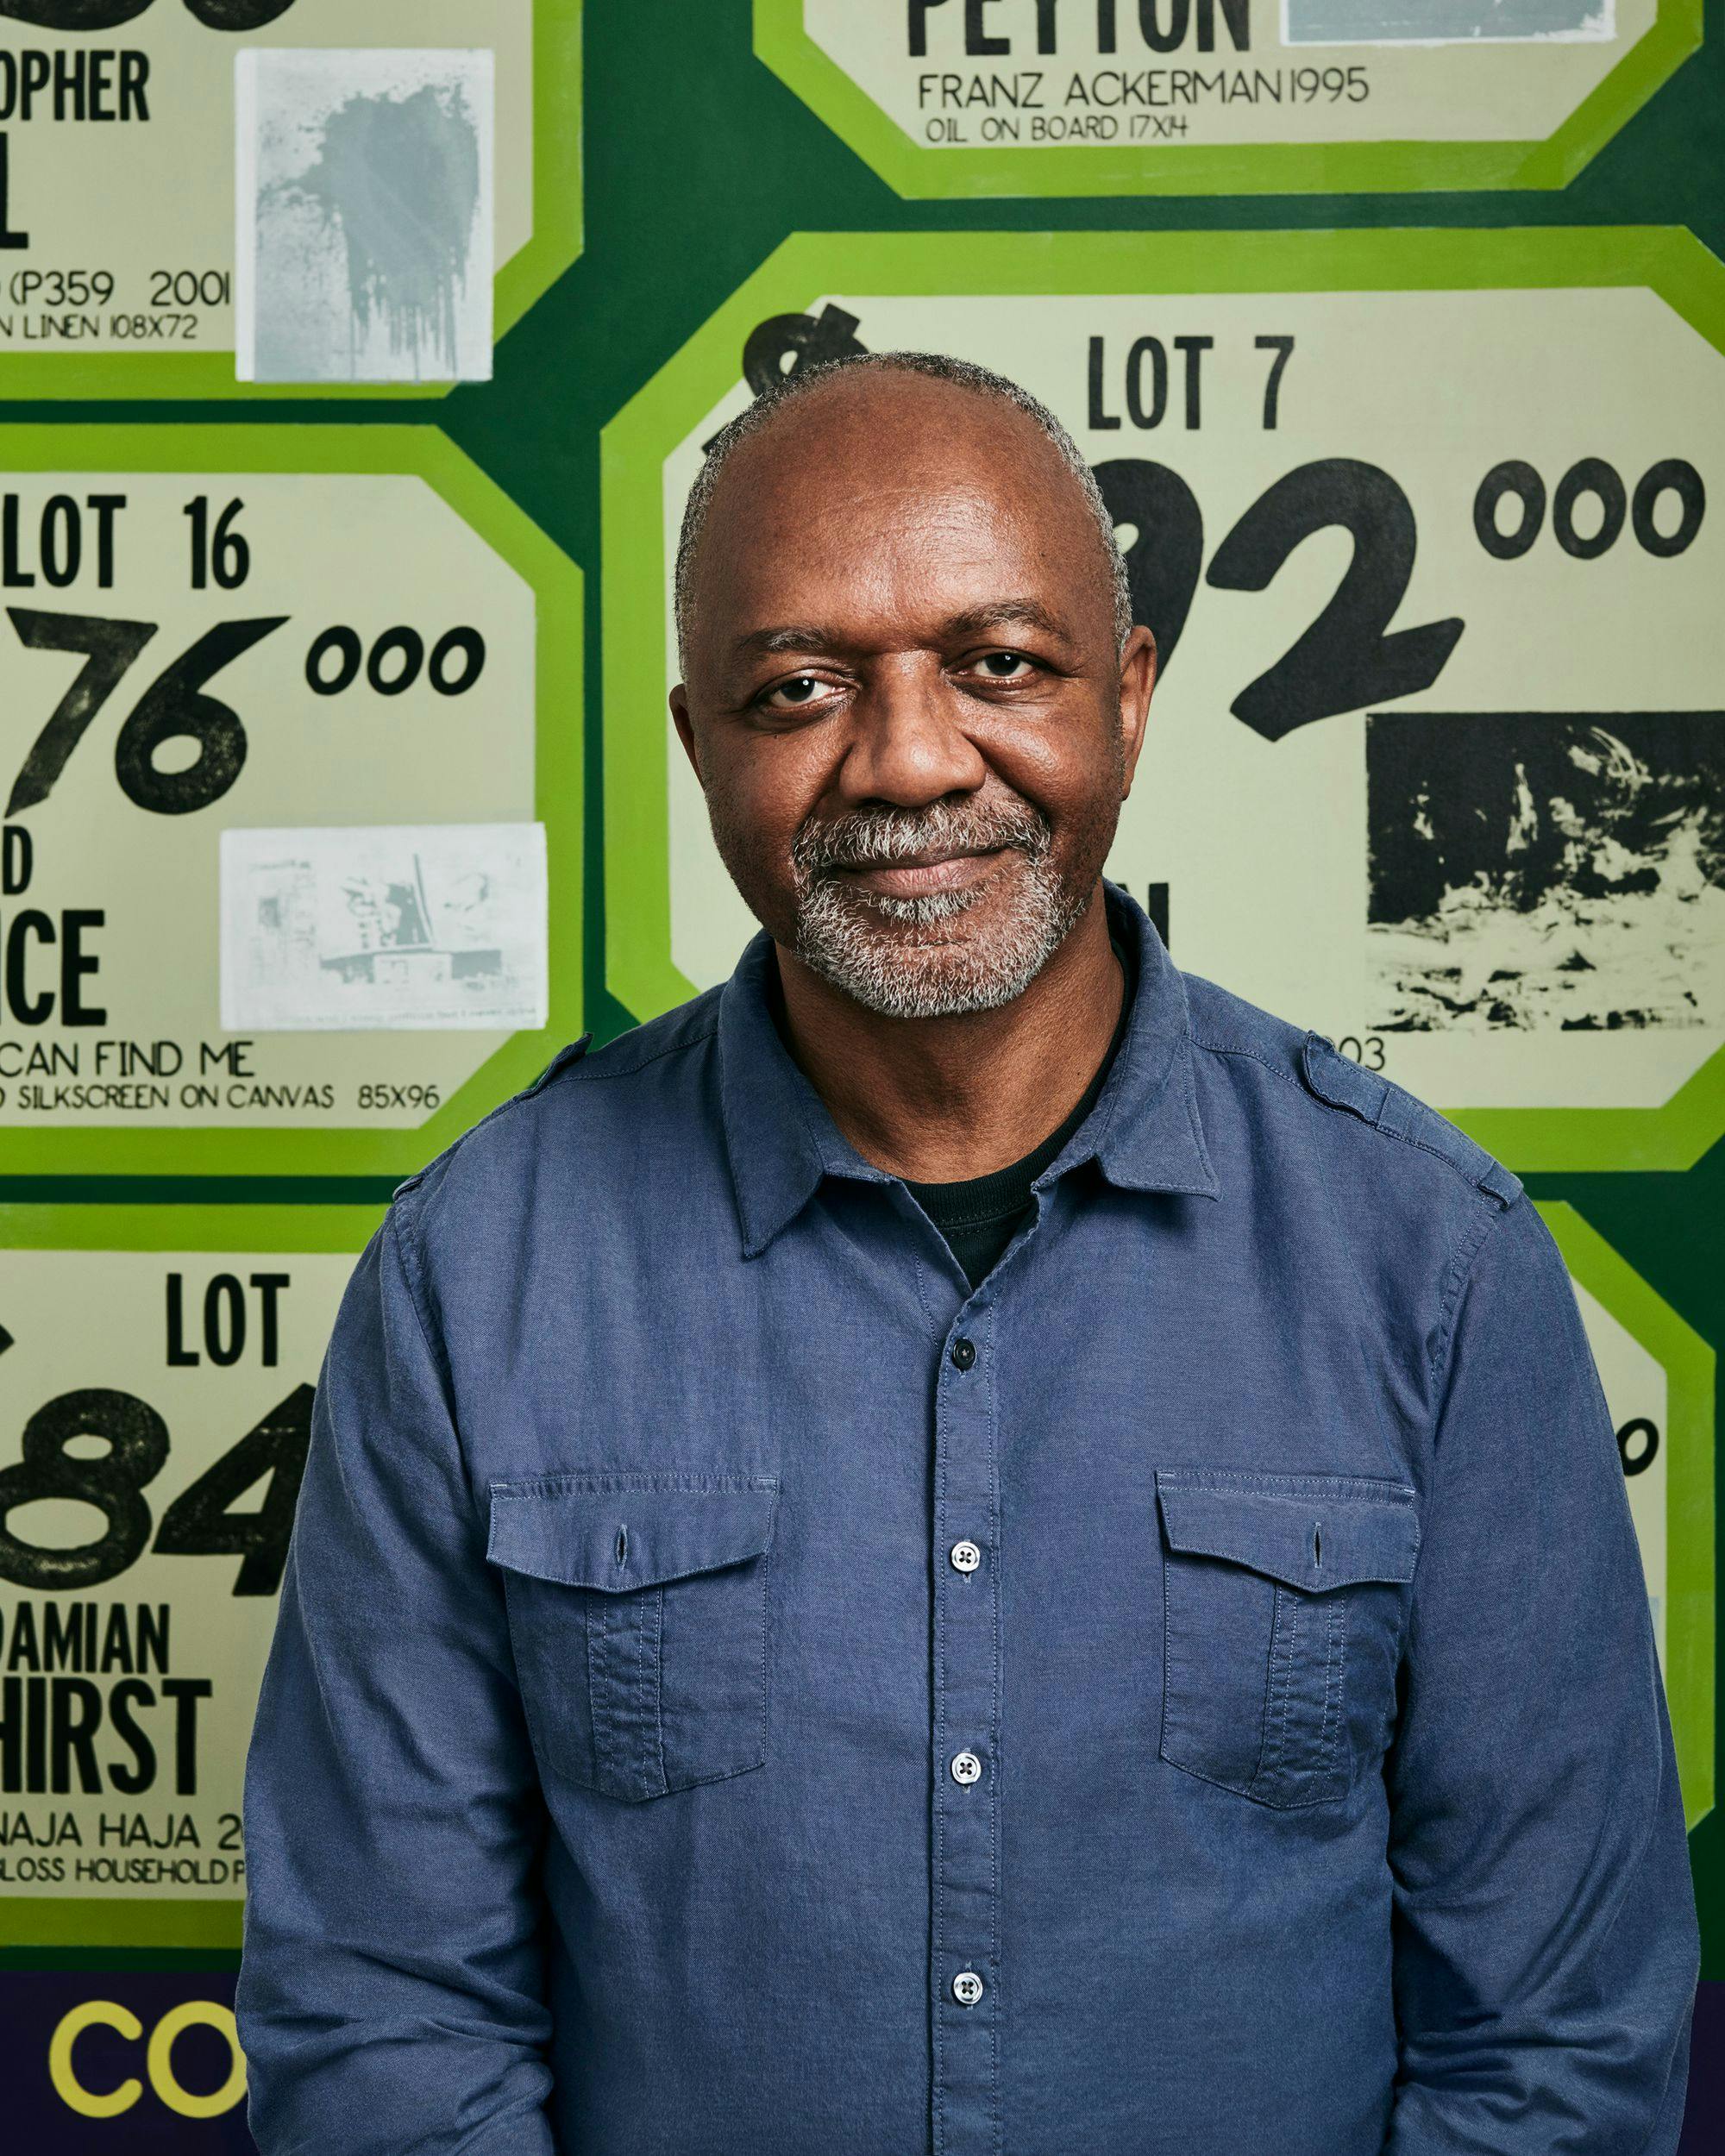 A photograph of Kerry James Marshall by Jason Bell, dated 2018.